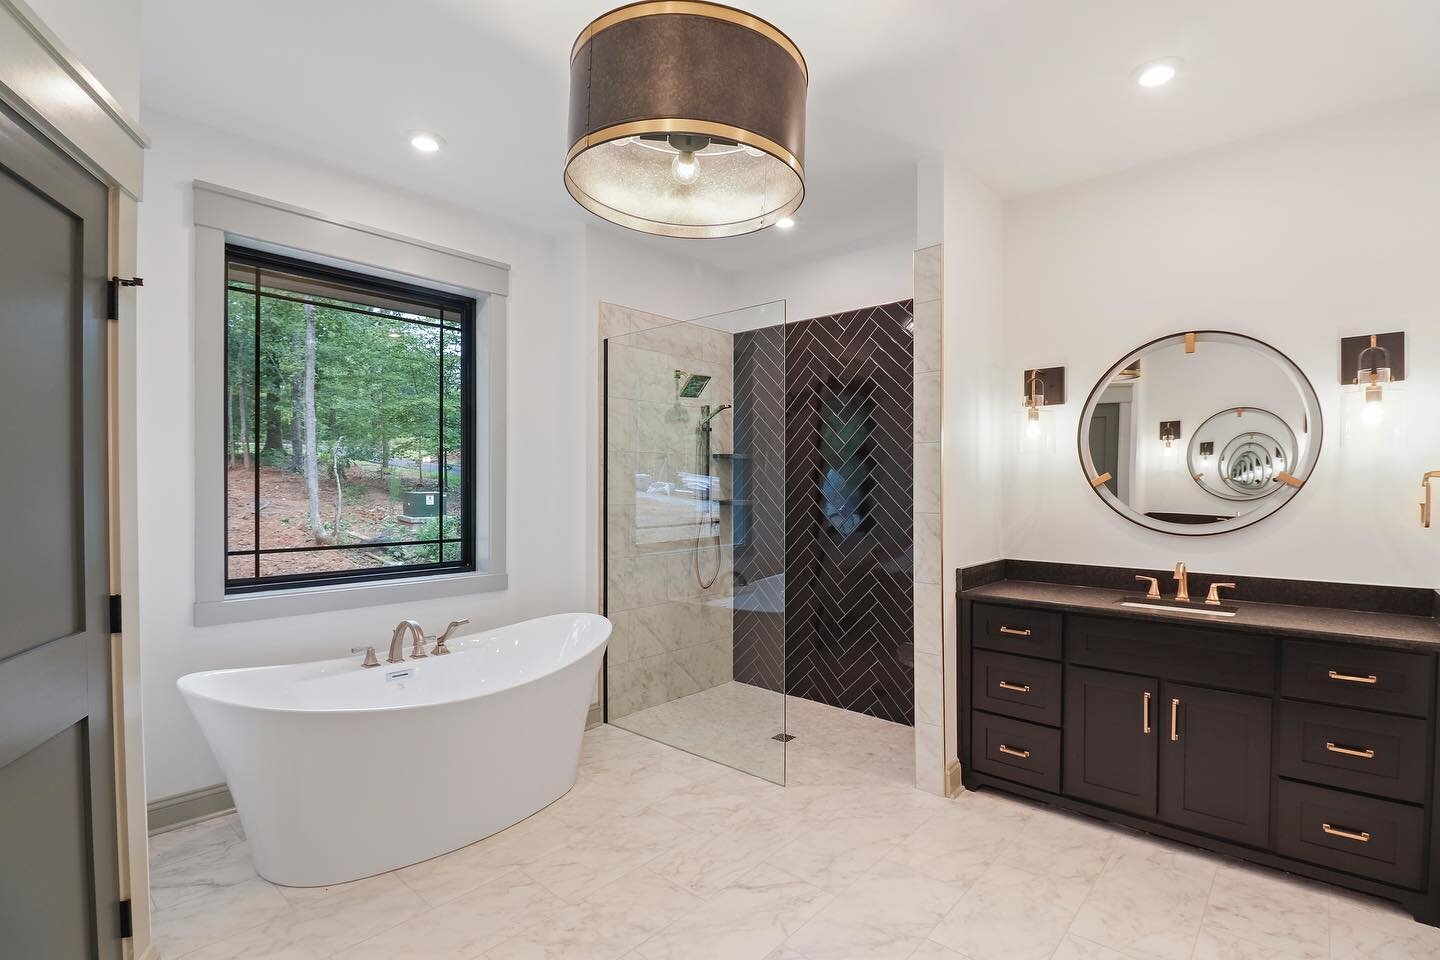 The key to an awesome master bathroom for me is a huge walk in shower, soaking tub and double SEPARATE vanities. That&rsquo;s not too much to ask is it!? Have you put some thought into what is important for your dream bathroom!?